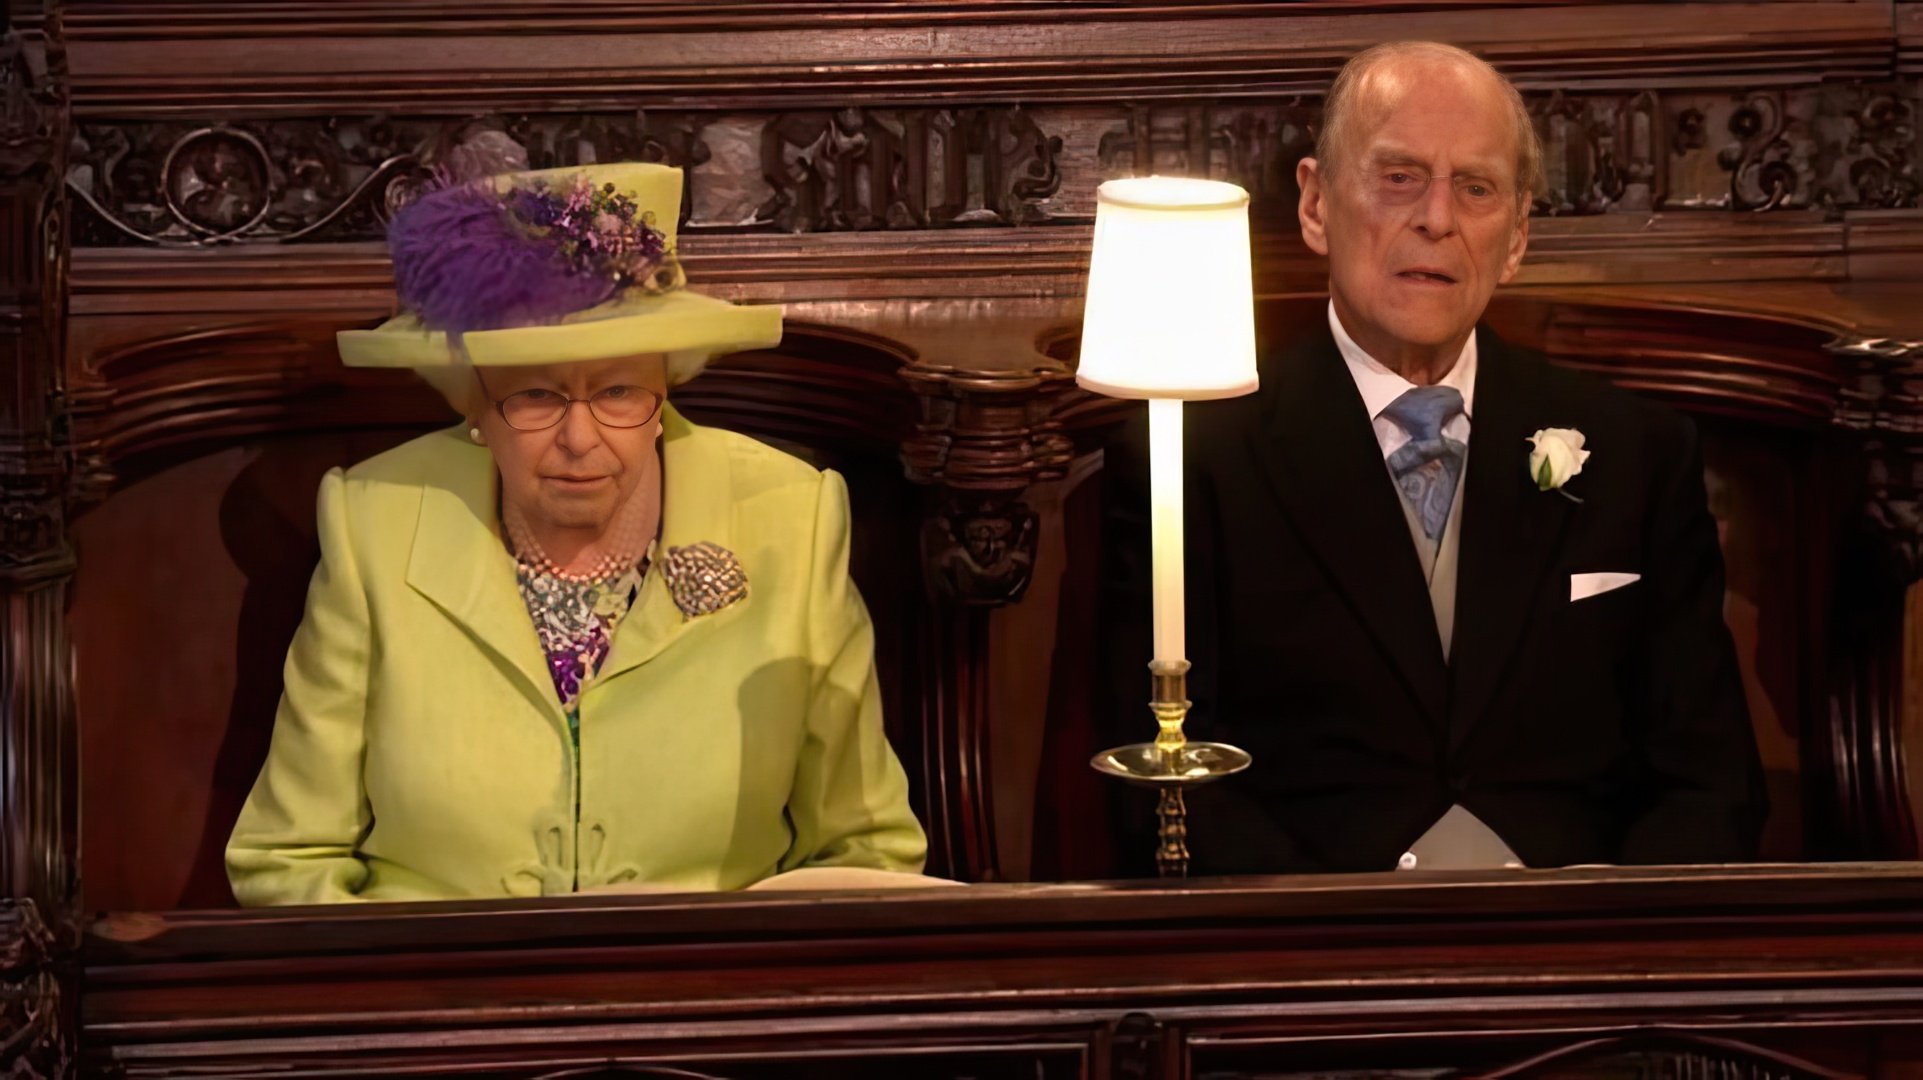 Elizabeth II and Prince Philip at the wedding of Prince Harry and Meghan Markle